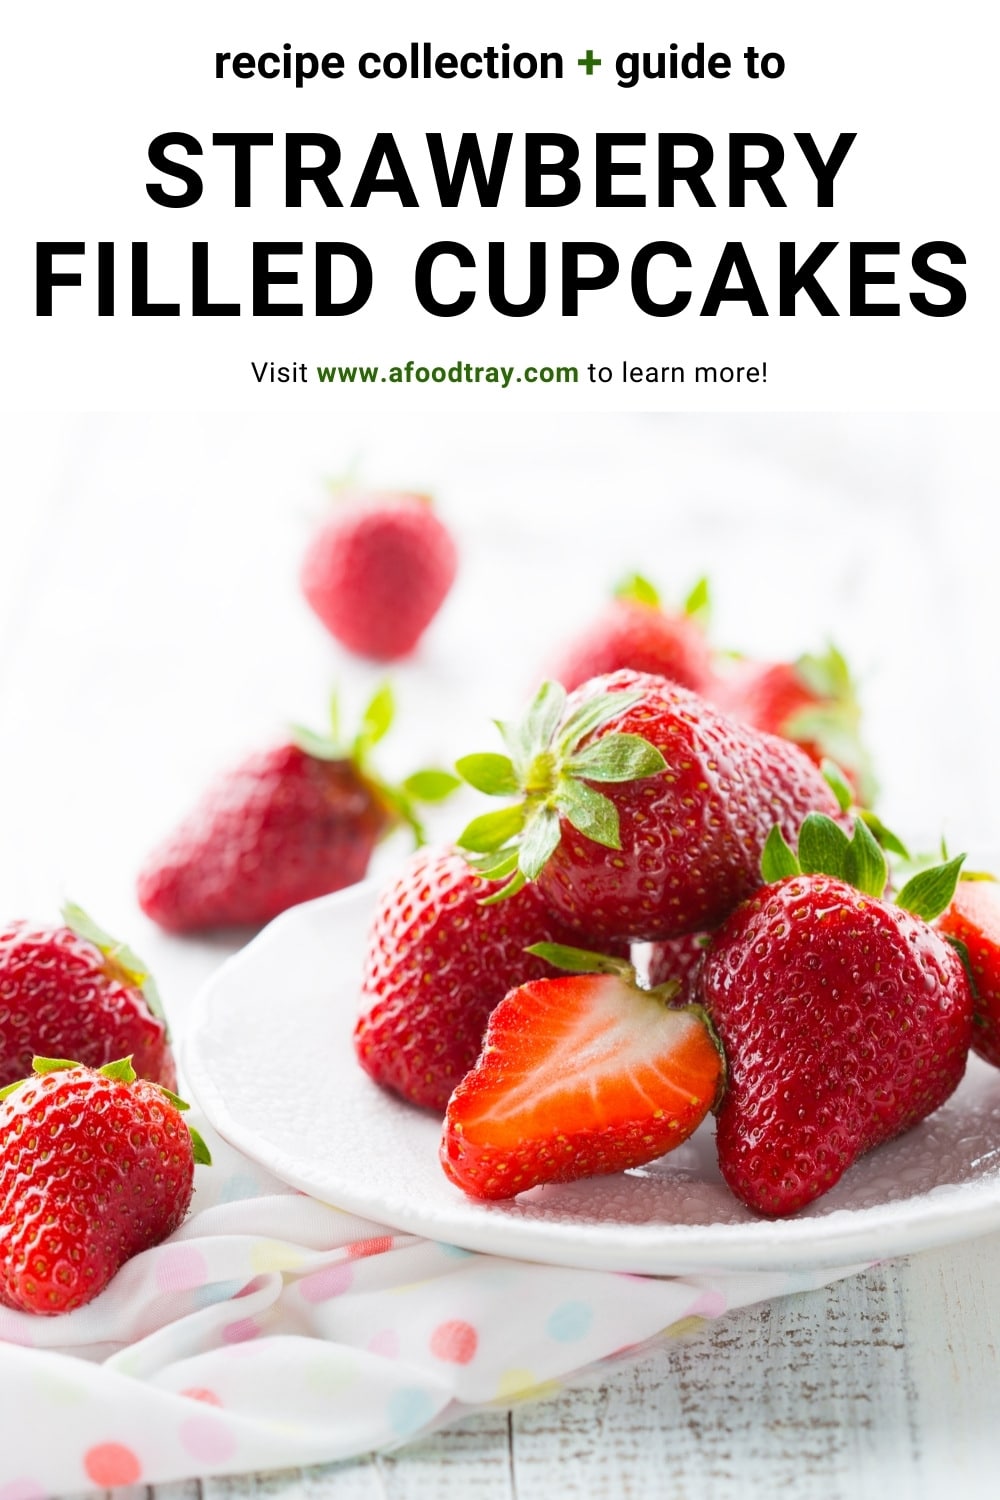 Strawberry filled cupcake recipes and guide